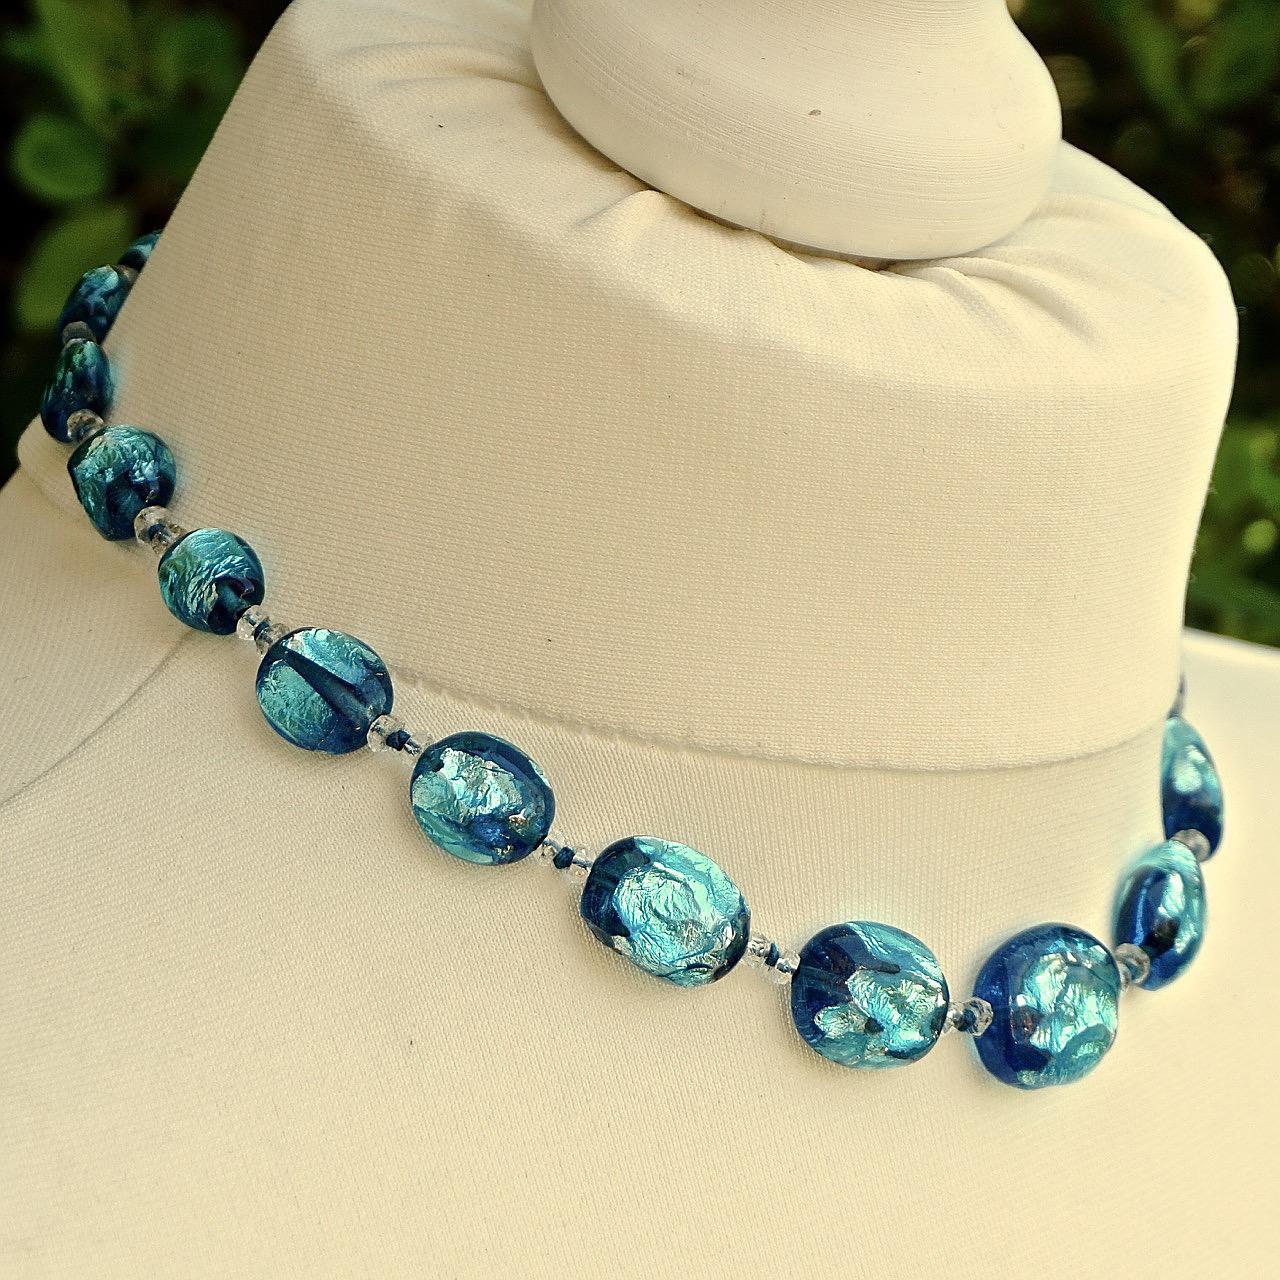 Graduated Blue Foil Glass Bead Necklace with a Silver Clasp For Sale 2